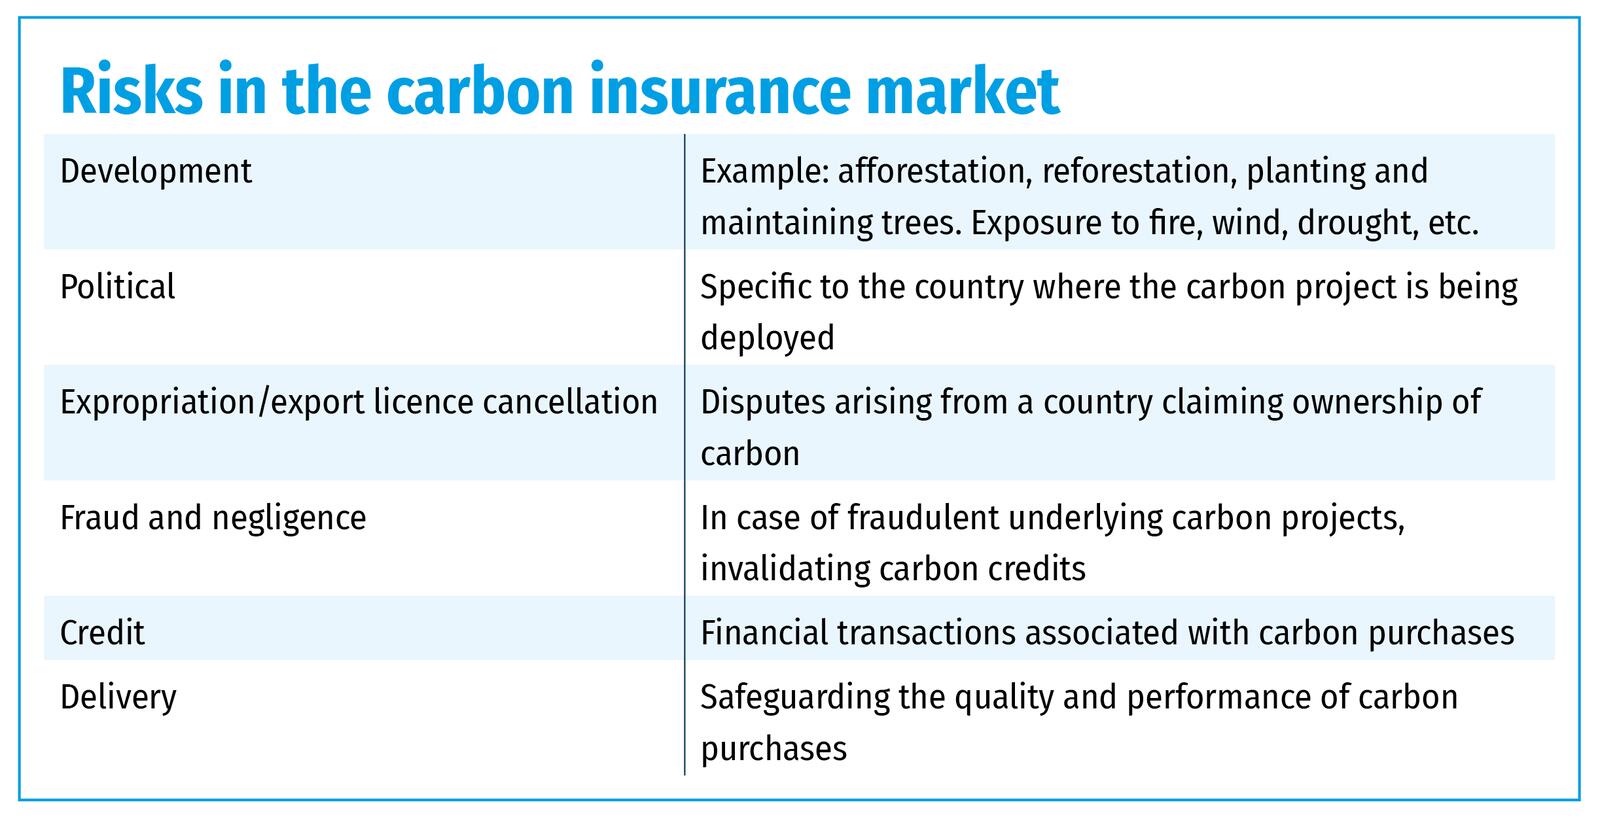 Risks in the carbon insurance market